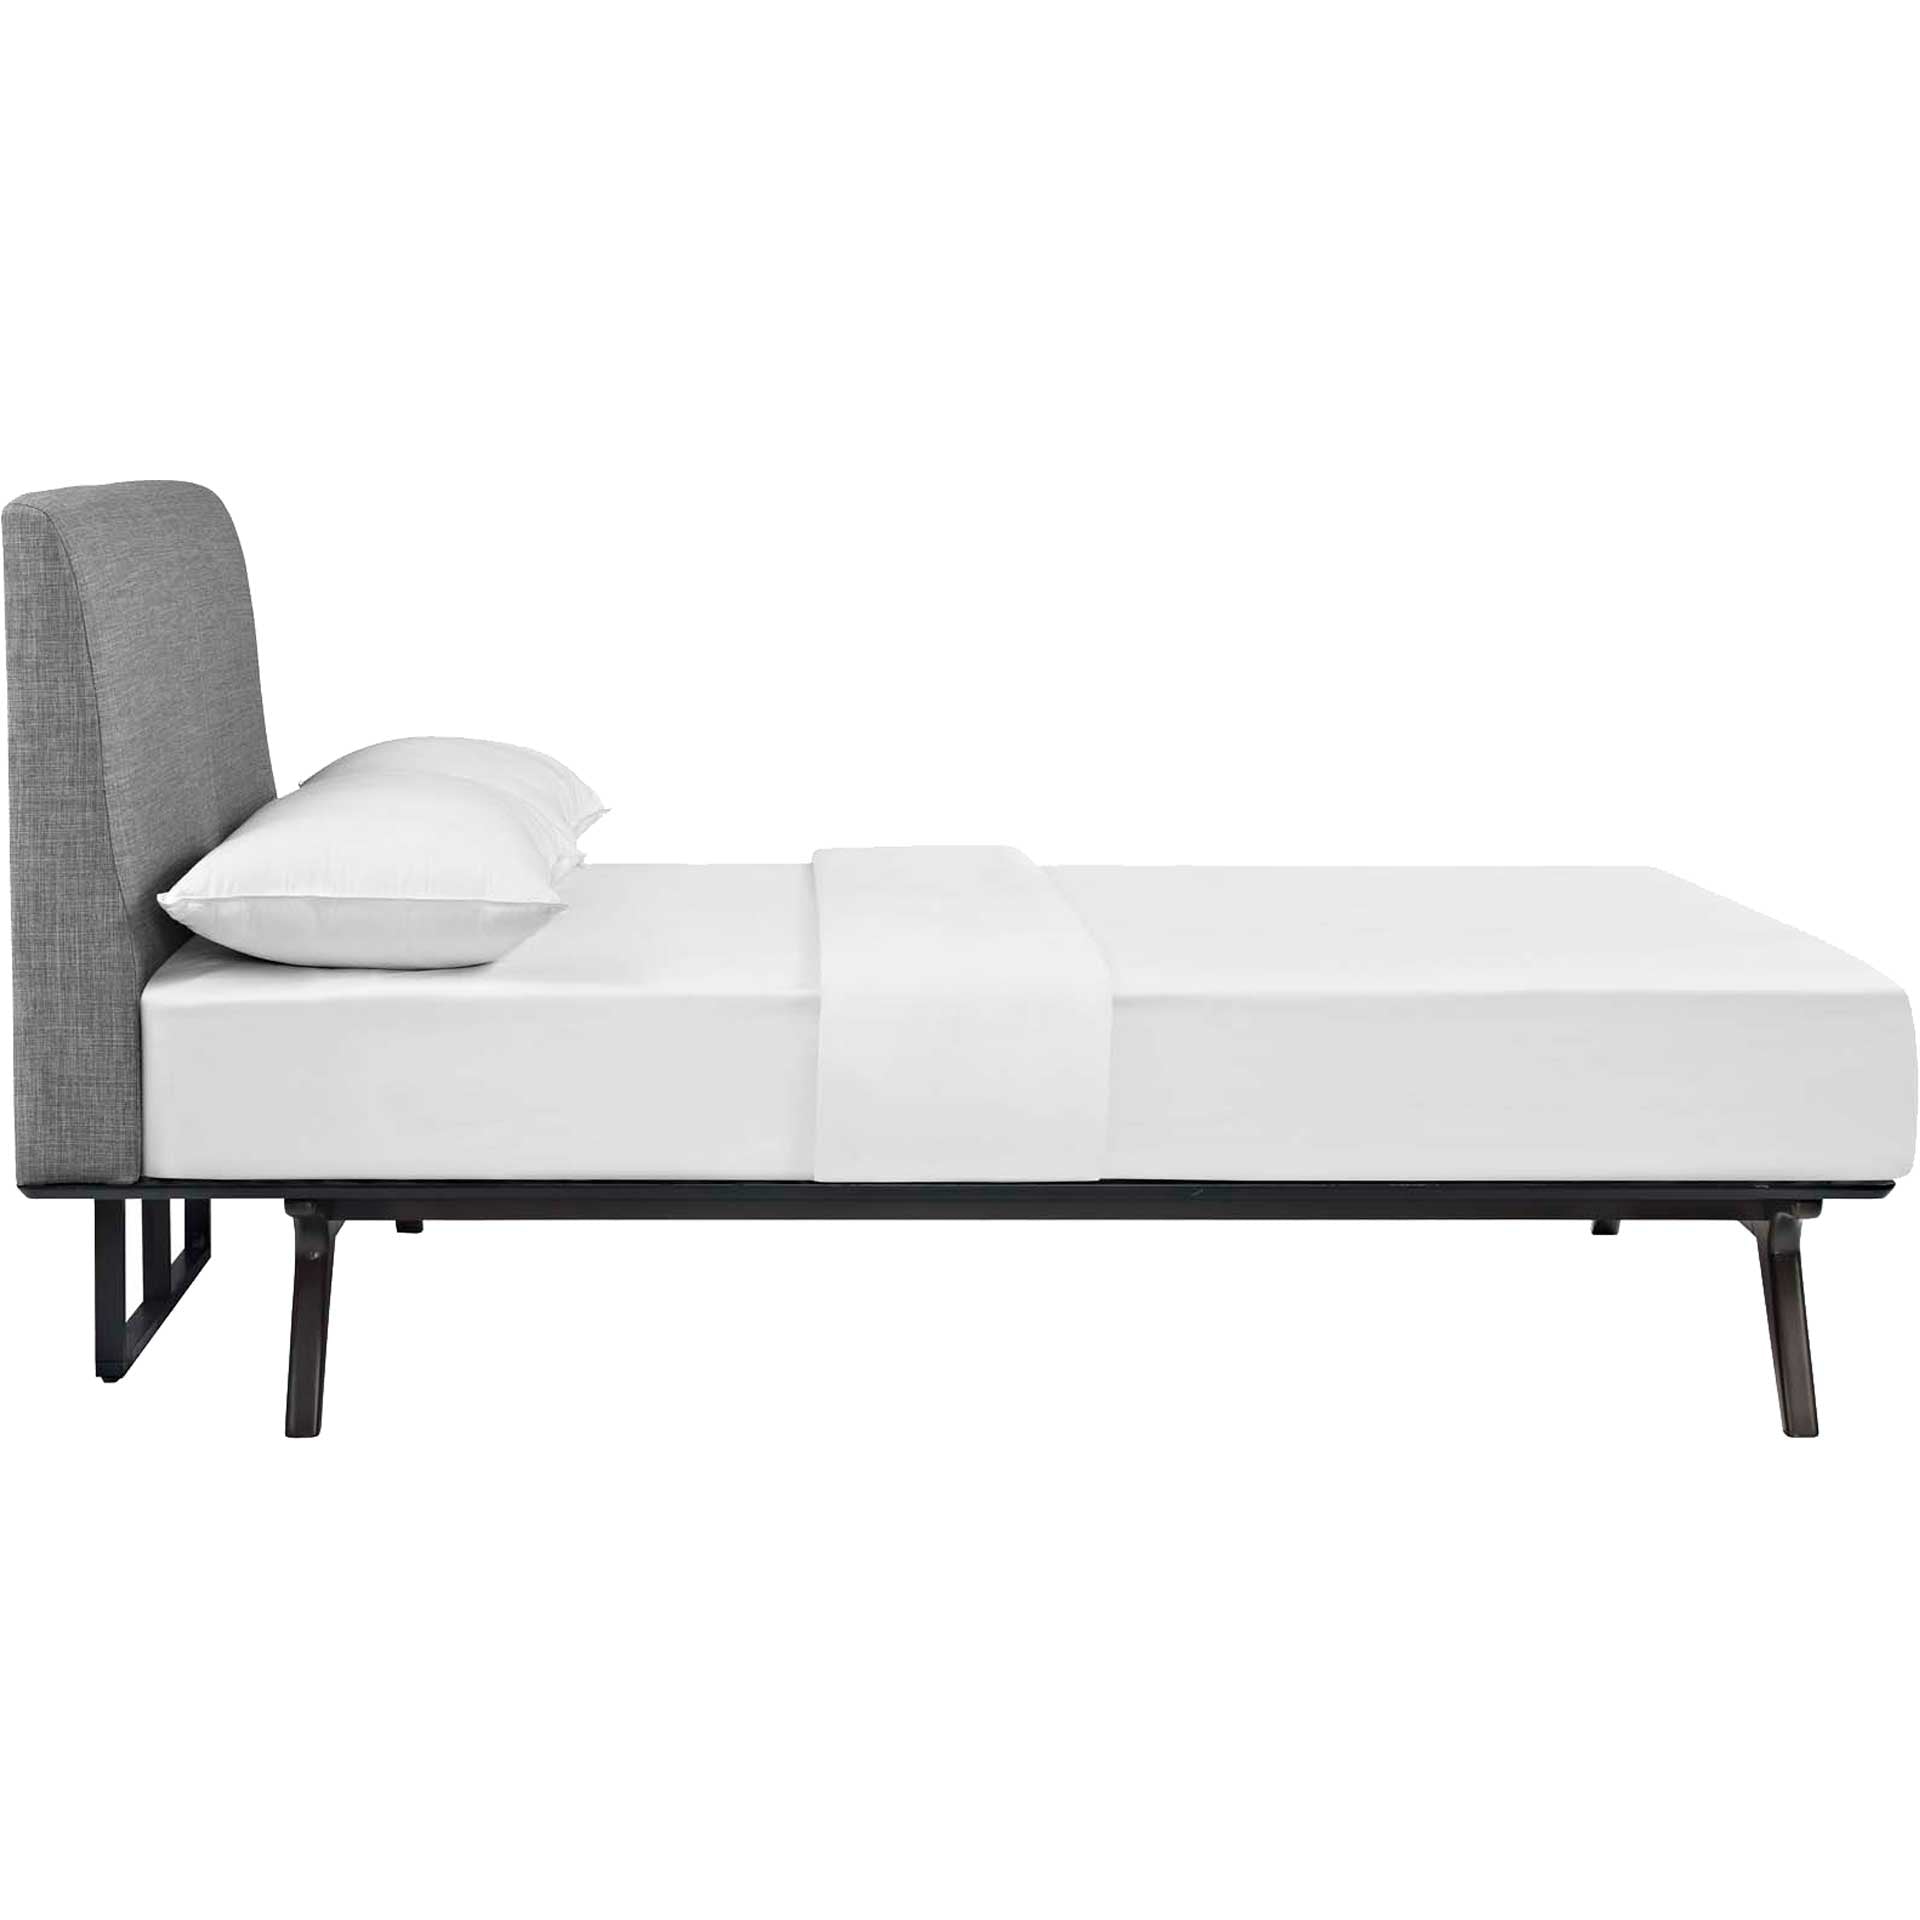 Thames Wood Bed Cappuccino/Gray